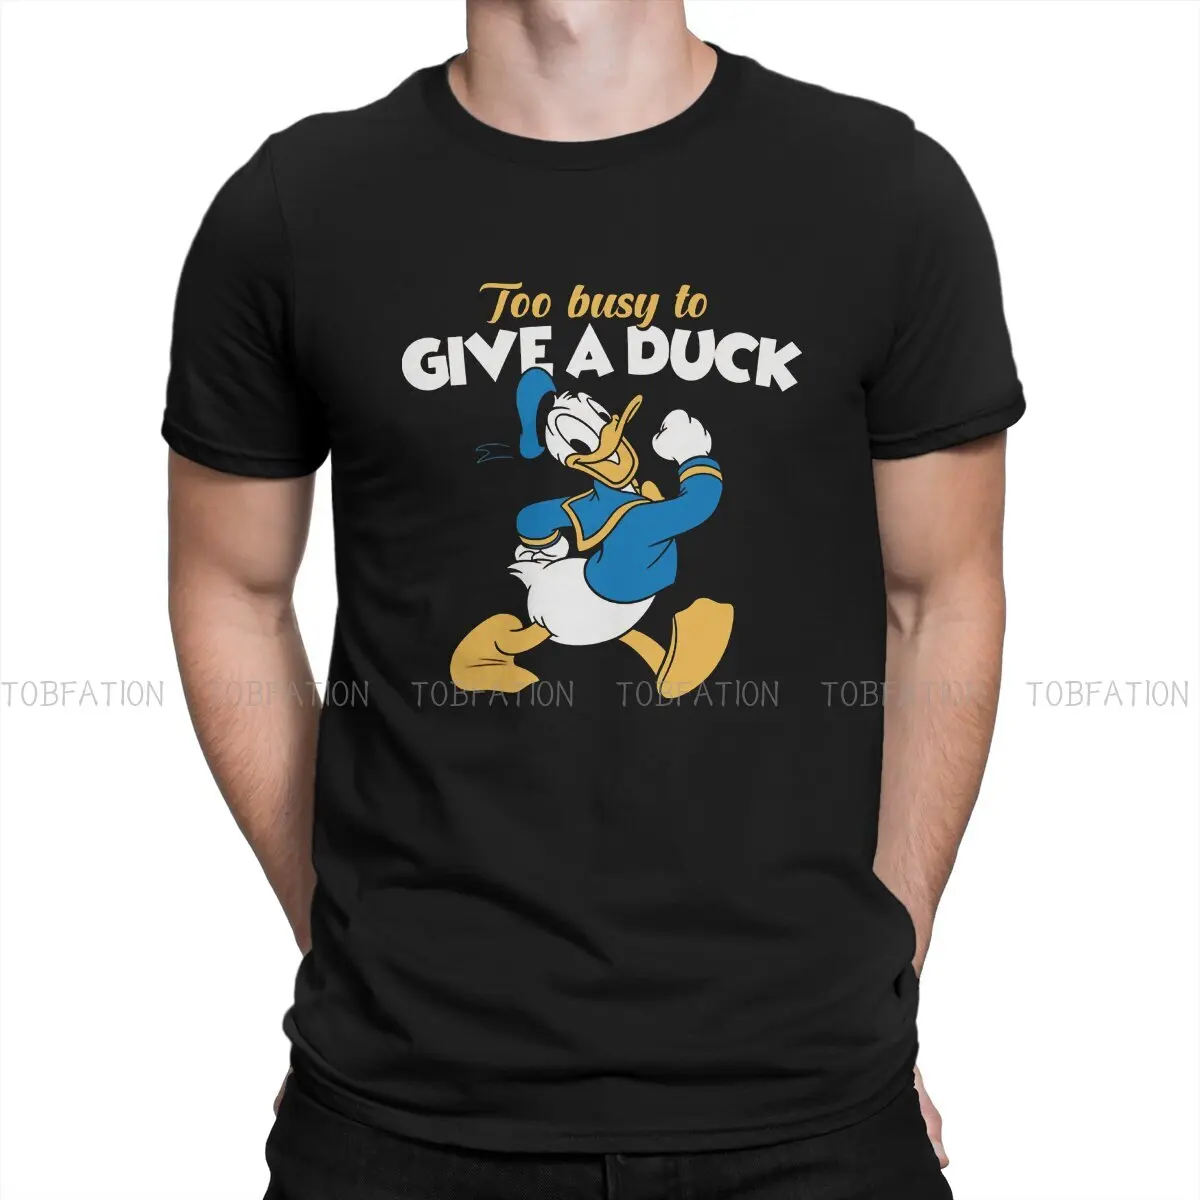 

Disney Donald Duck Cartoon Creative TShirt for Men Too Busy To Give A Duck Round Neck Pure Cotton T Shirt